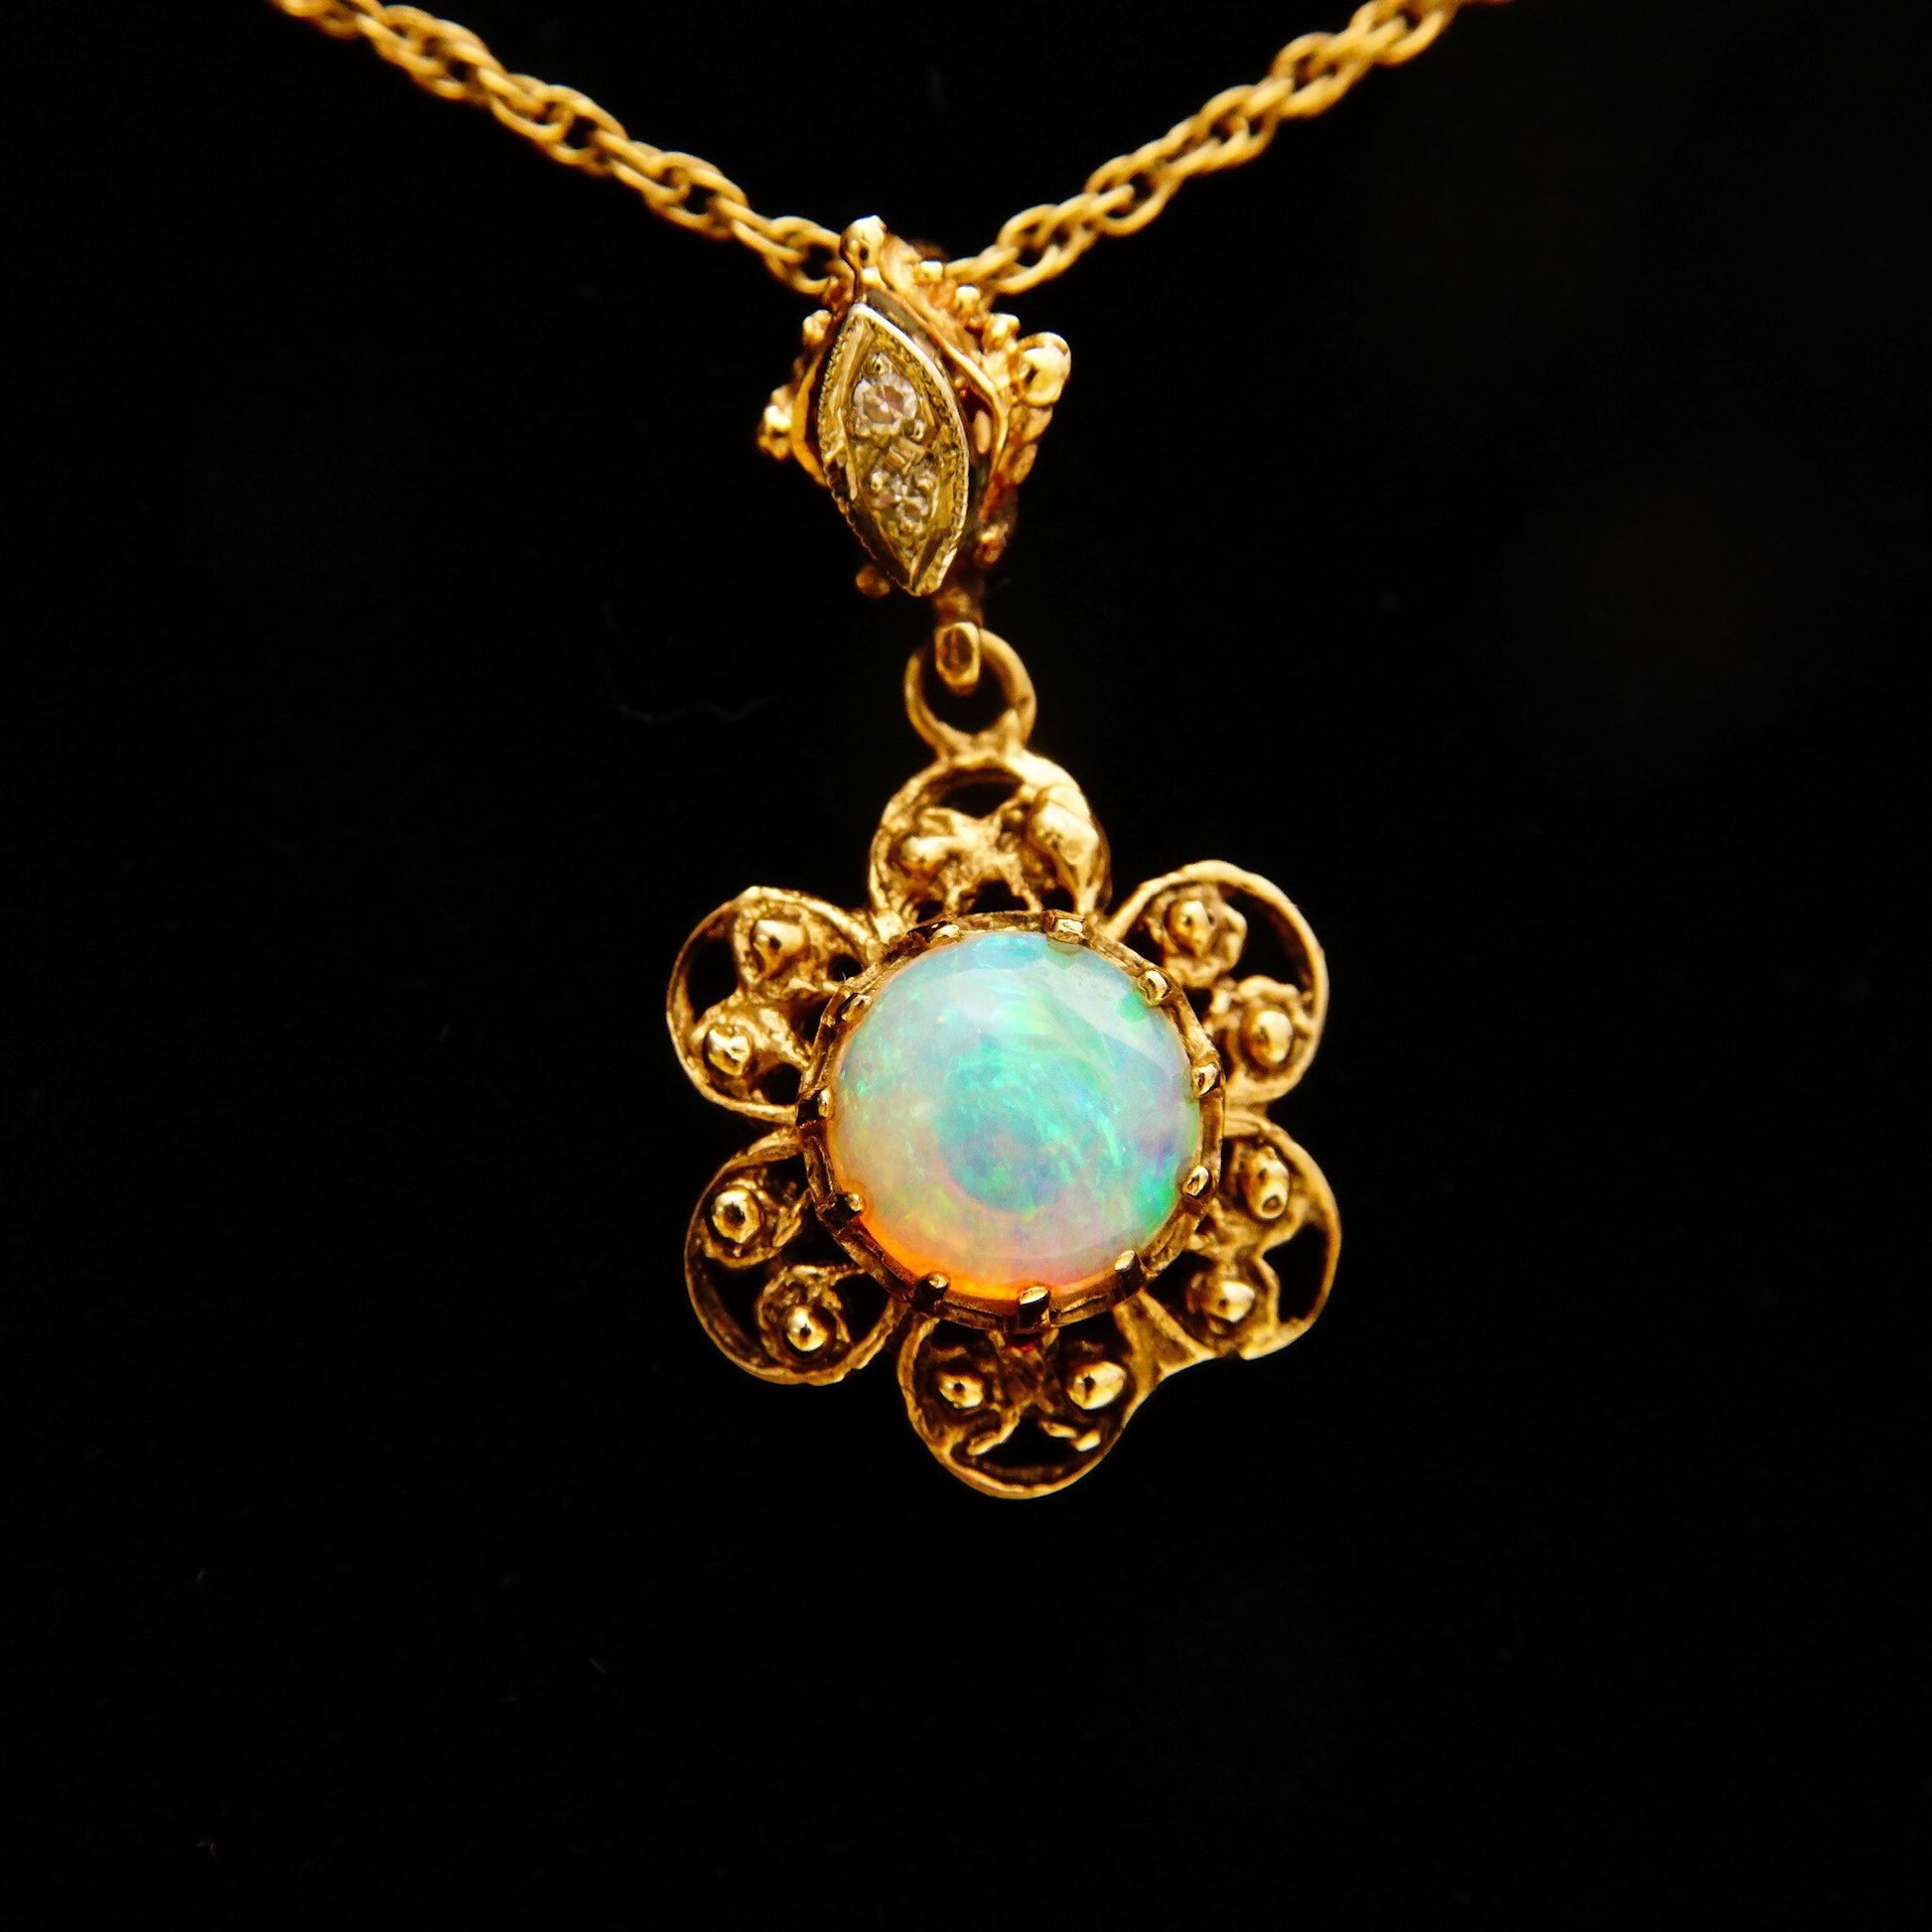 14K gold filigree flower pendant necklace featuring an iridescent opal cabochon center stone accented by two small diamonds, suspended from a delicate 1.5mm rope chain measuring 21 inches in length.